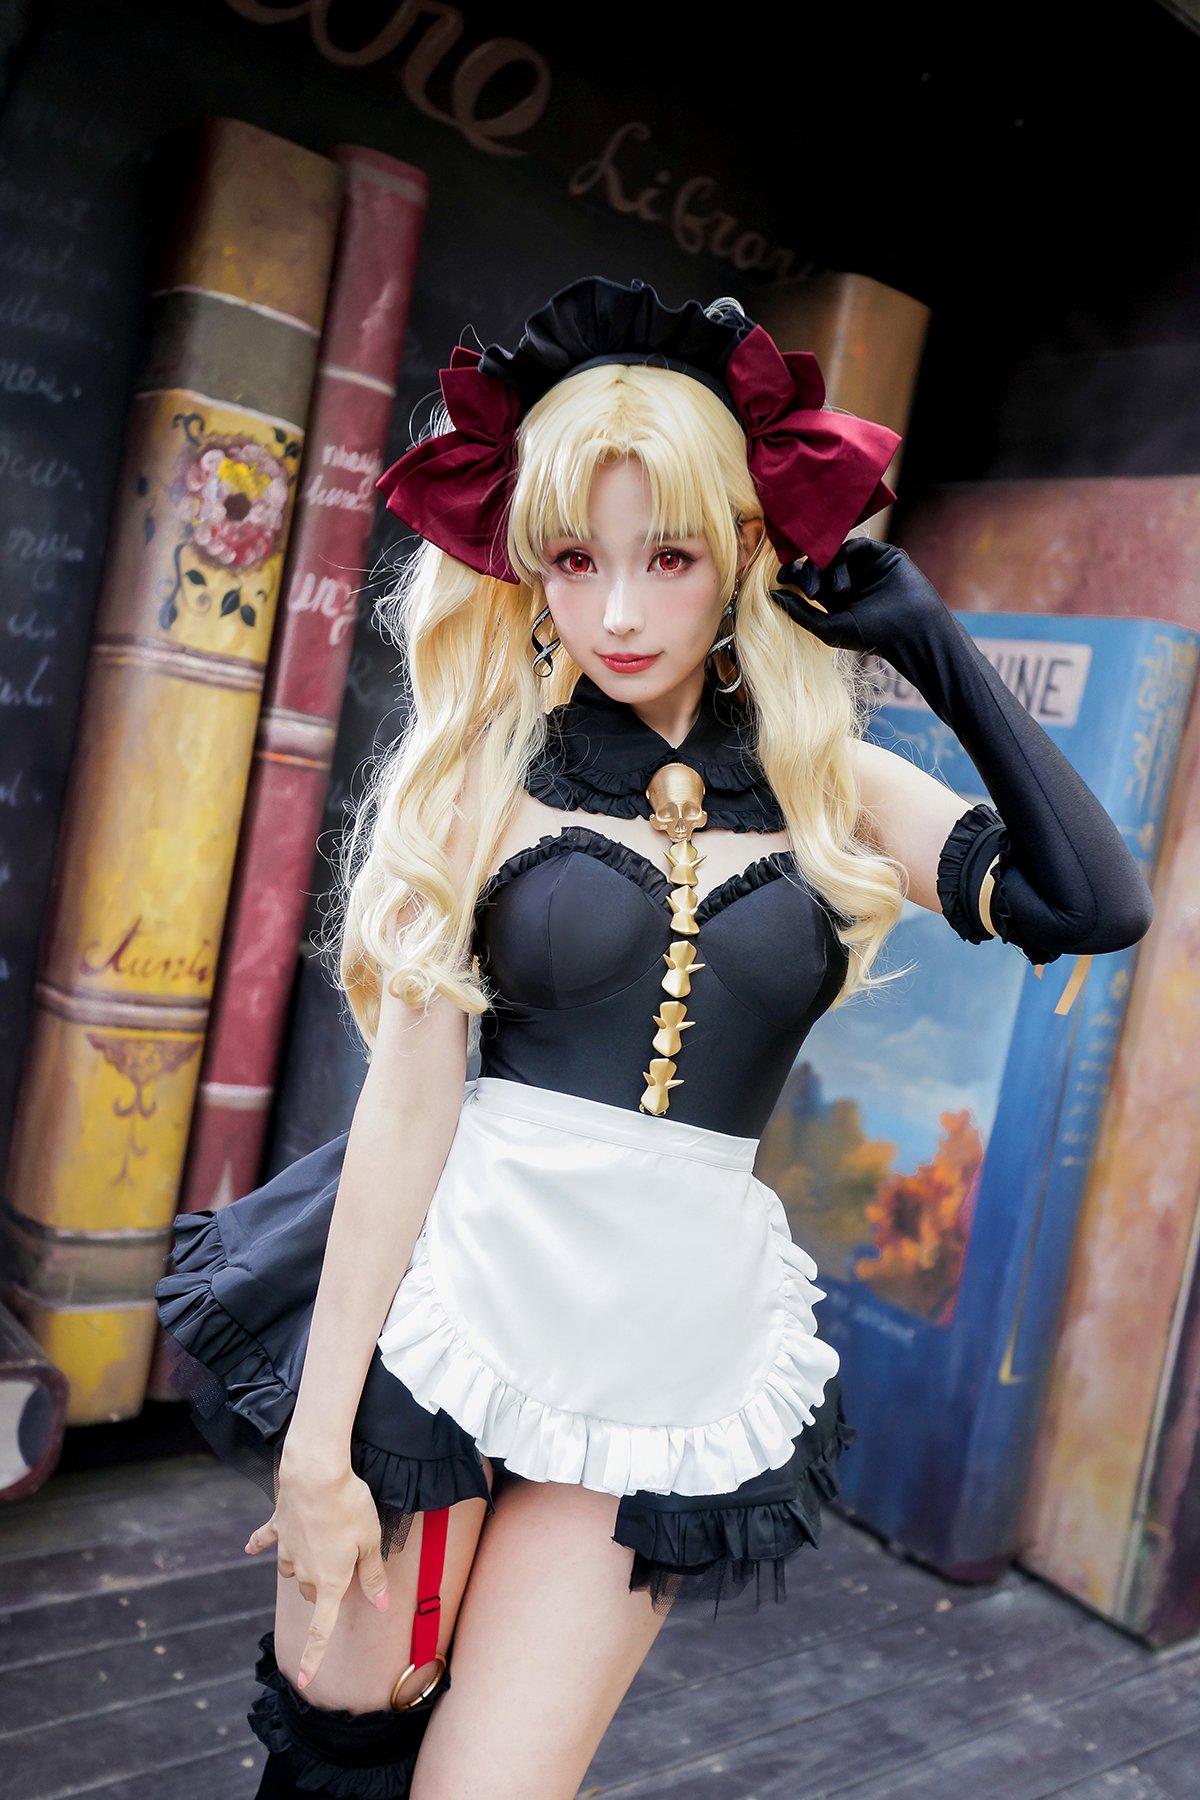 Coser@Ely Vol.022 ERE エレシュキガル 写真 A